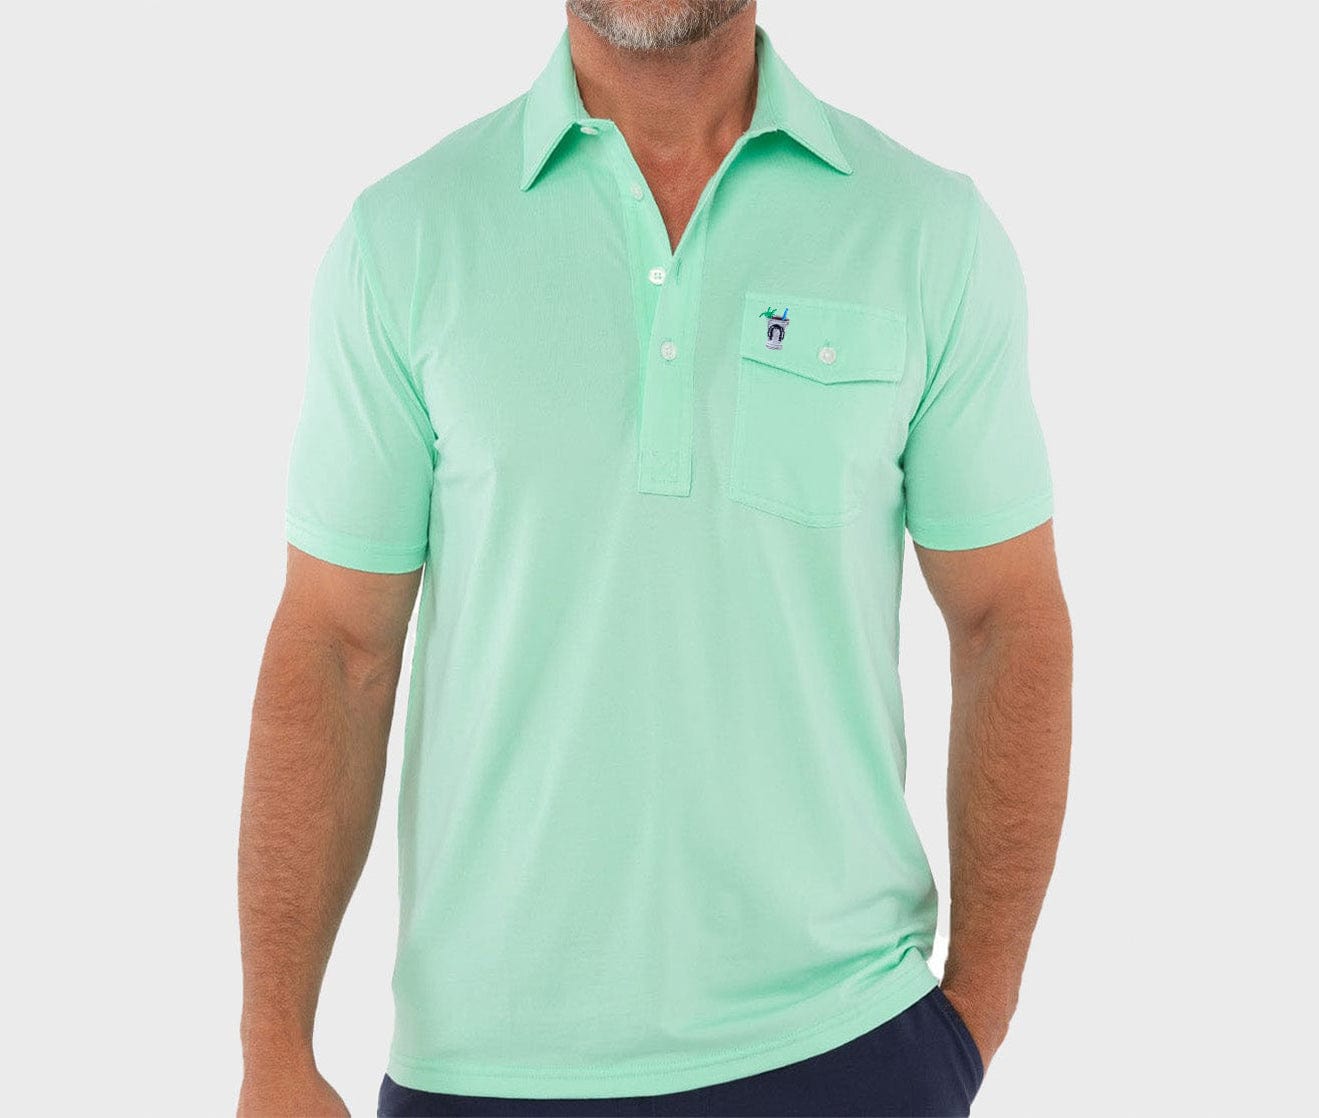 Limited Edition Performance Players Shirt - Mint Julep - Green